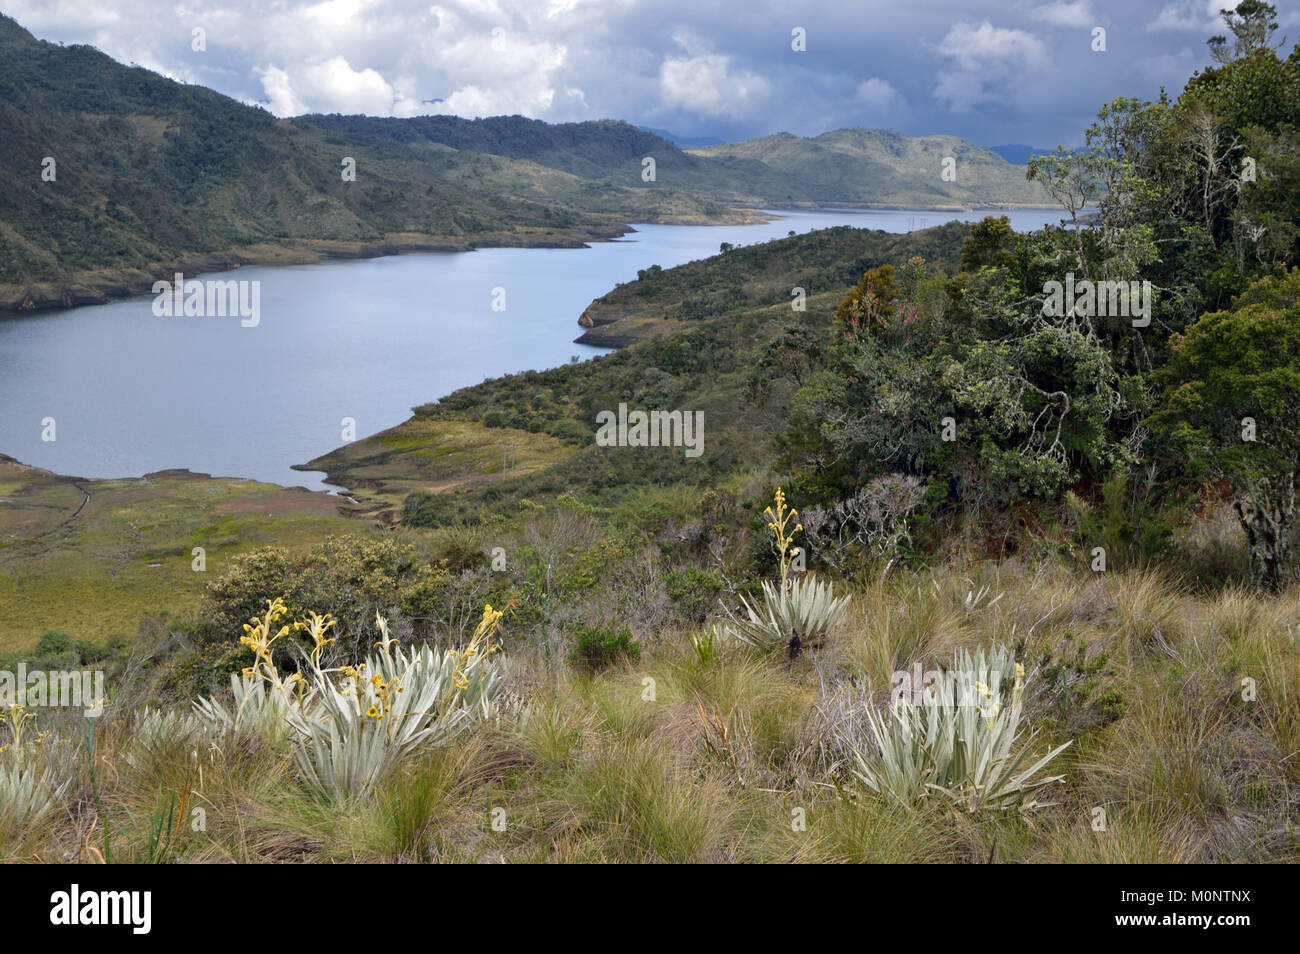 Located in the Colombian Andes, the Chingaza National Natural Park is important for the alpine tundra known as paramo and many Andean endemics. Stock Photo